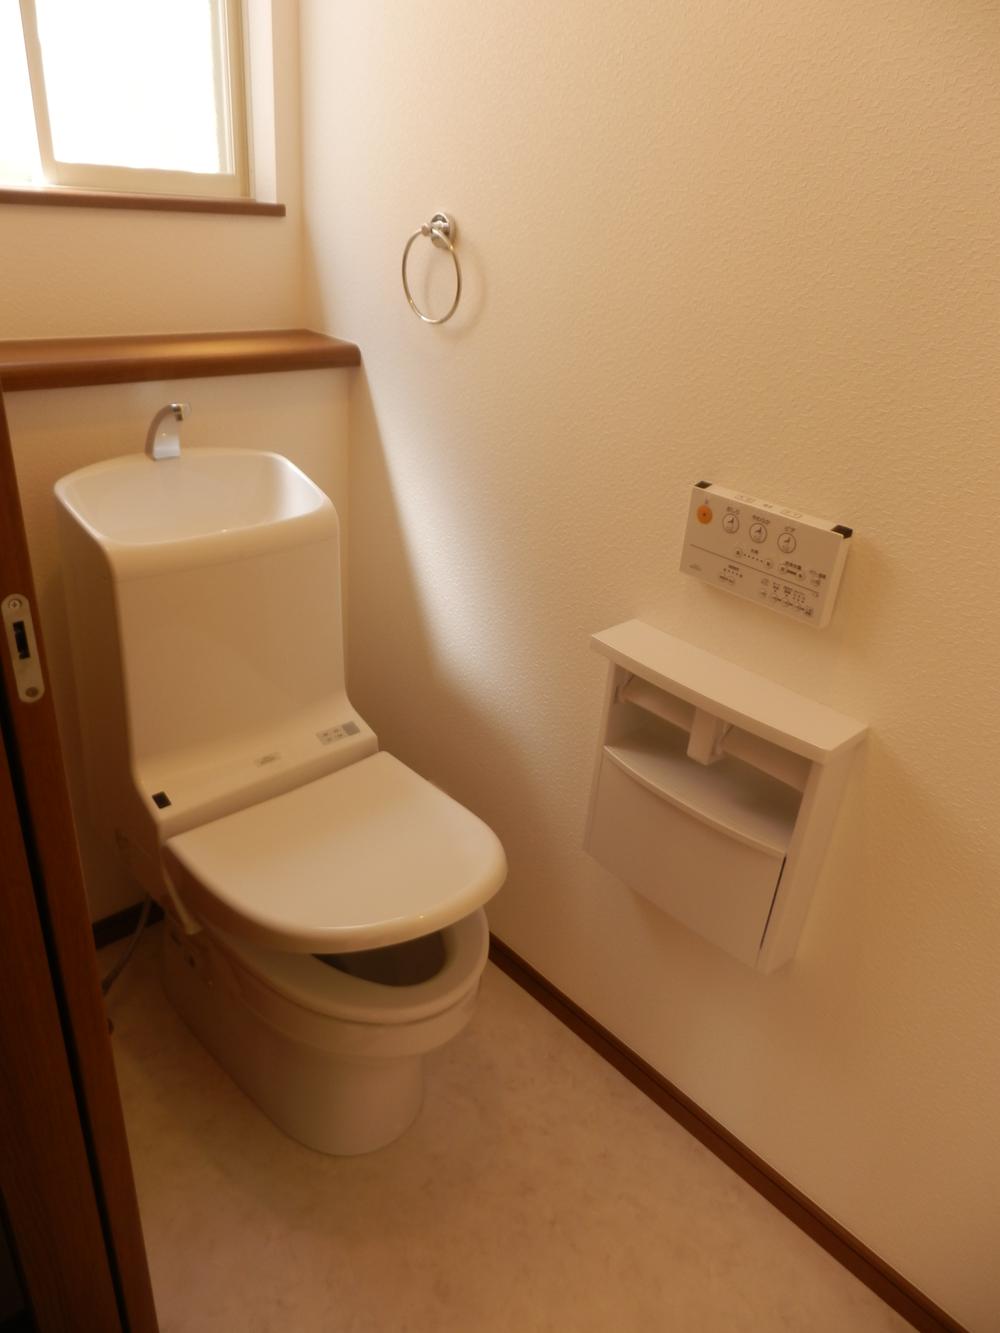 Other Equipment. Of course, heating toilet seat ・ With Washlet. 